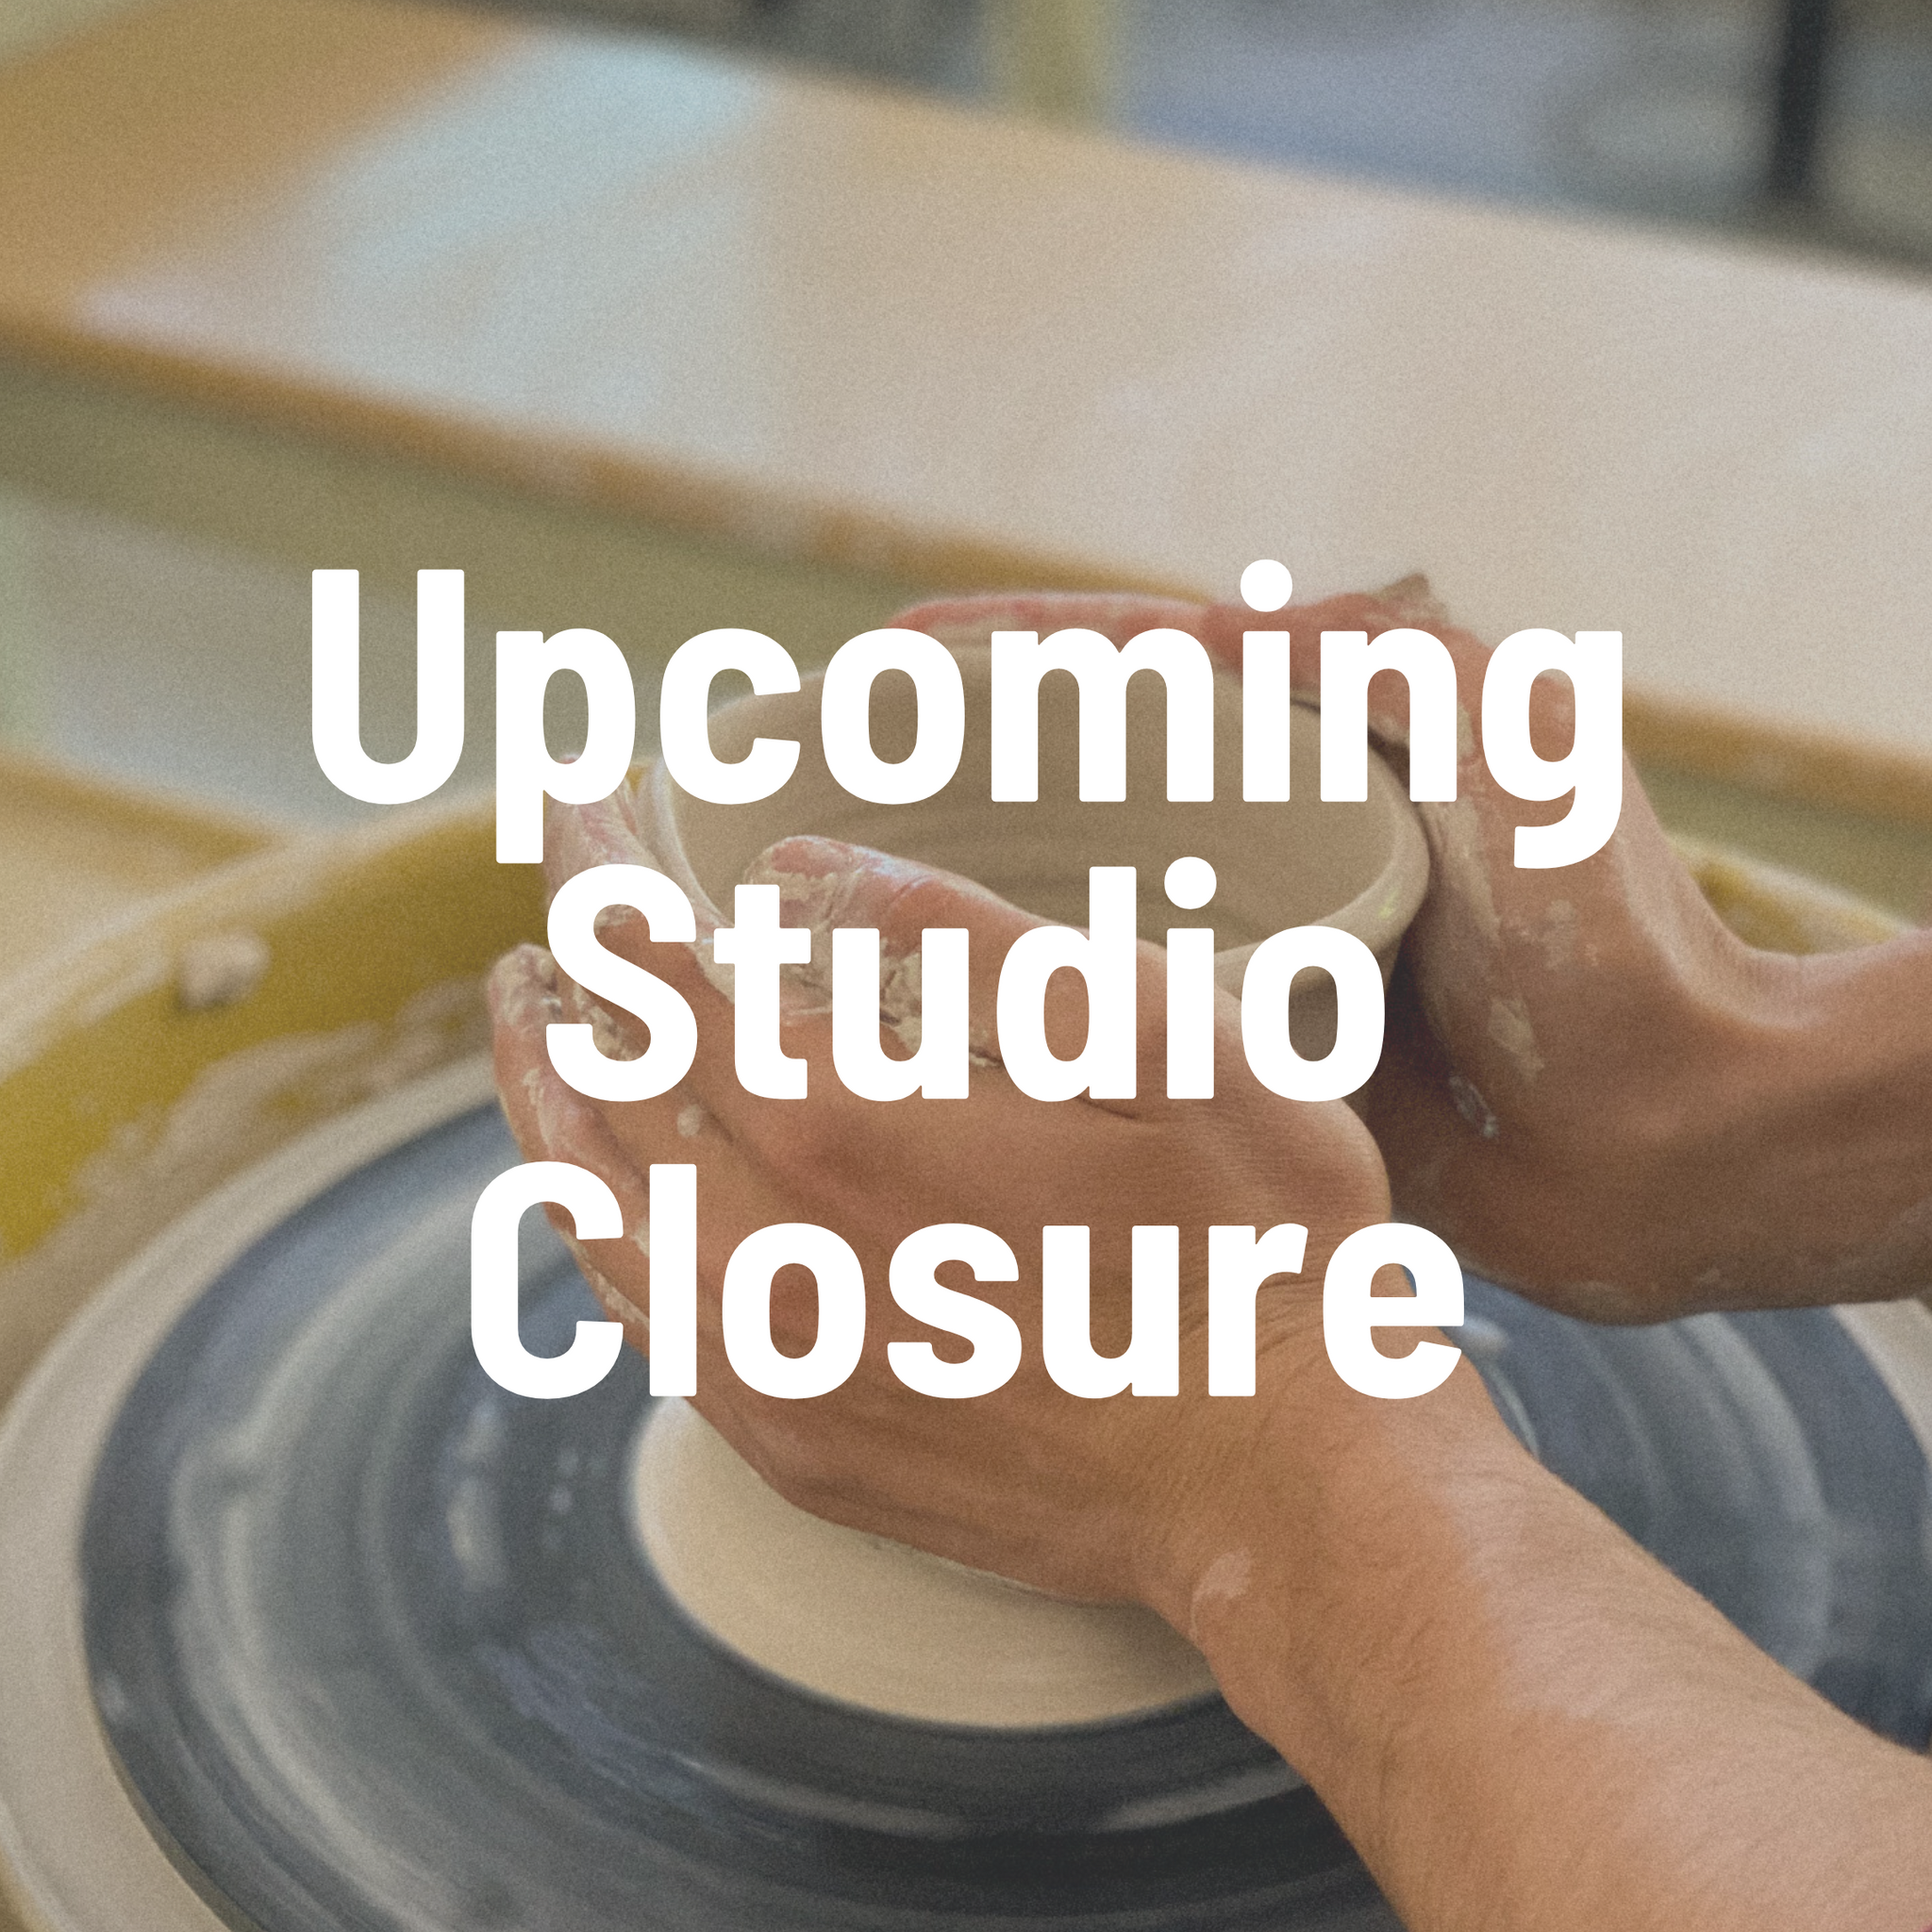 STUDIO CLOSURE - Monday September 4th for Labor Day